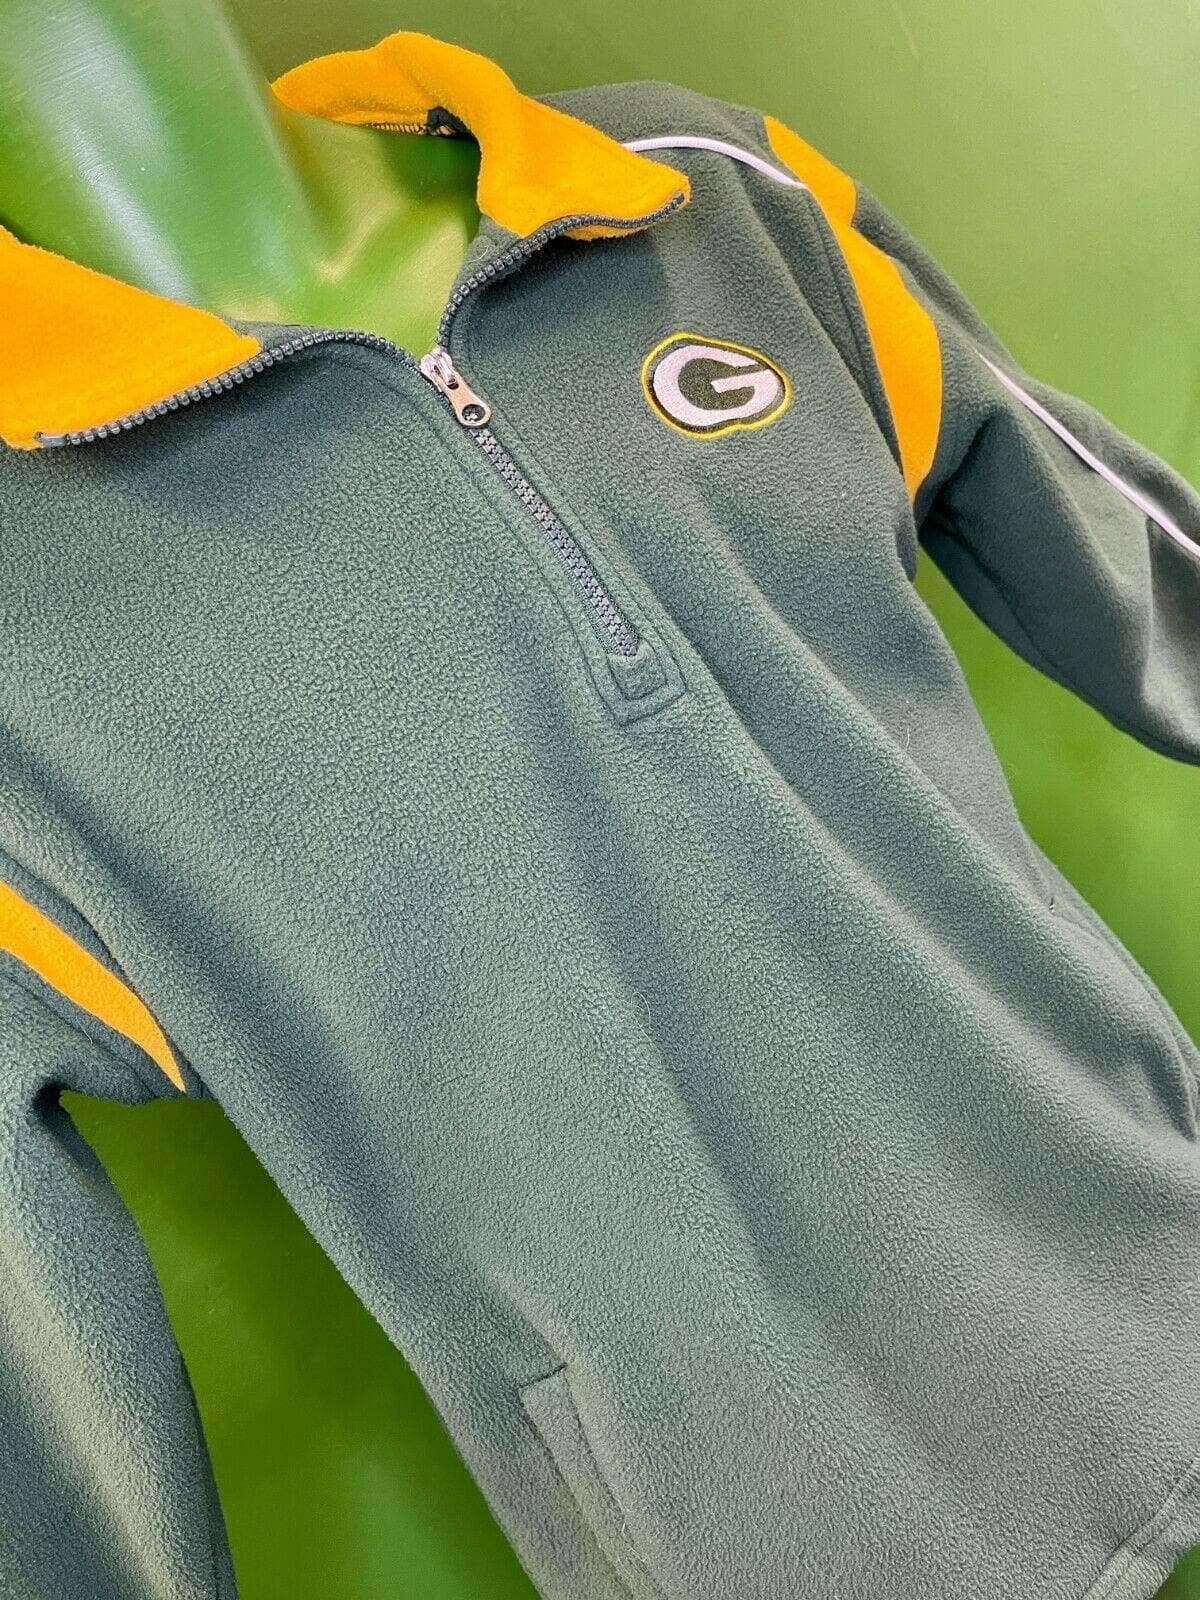 NFL Green Bay Packers Fleece 1-4 Zip Pullover Youth X-Large 14-16